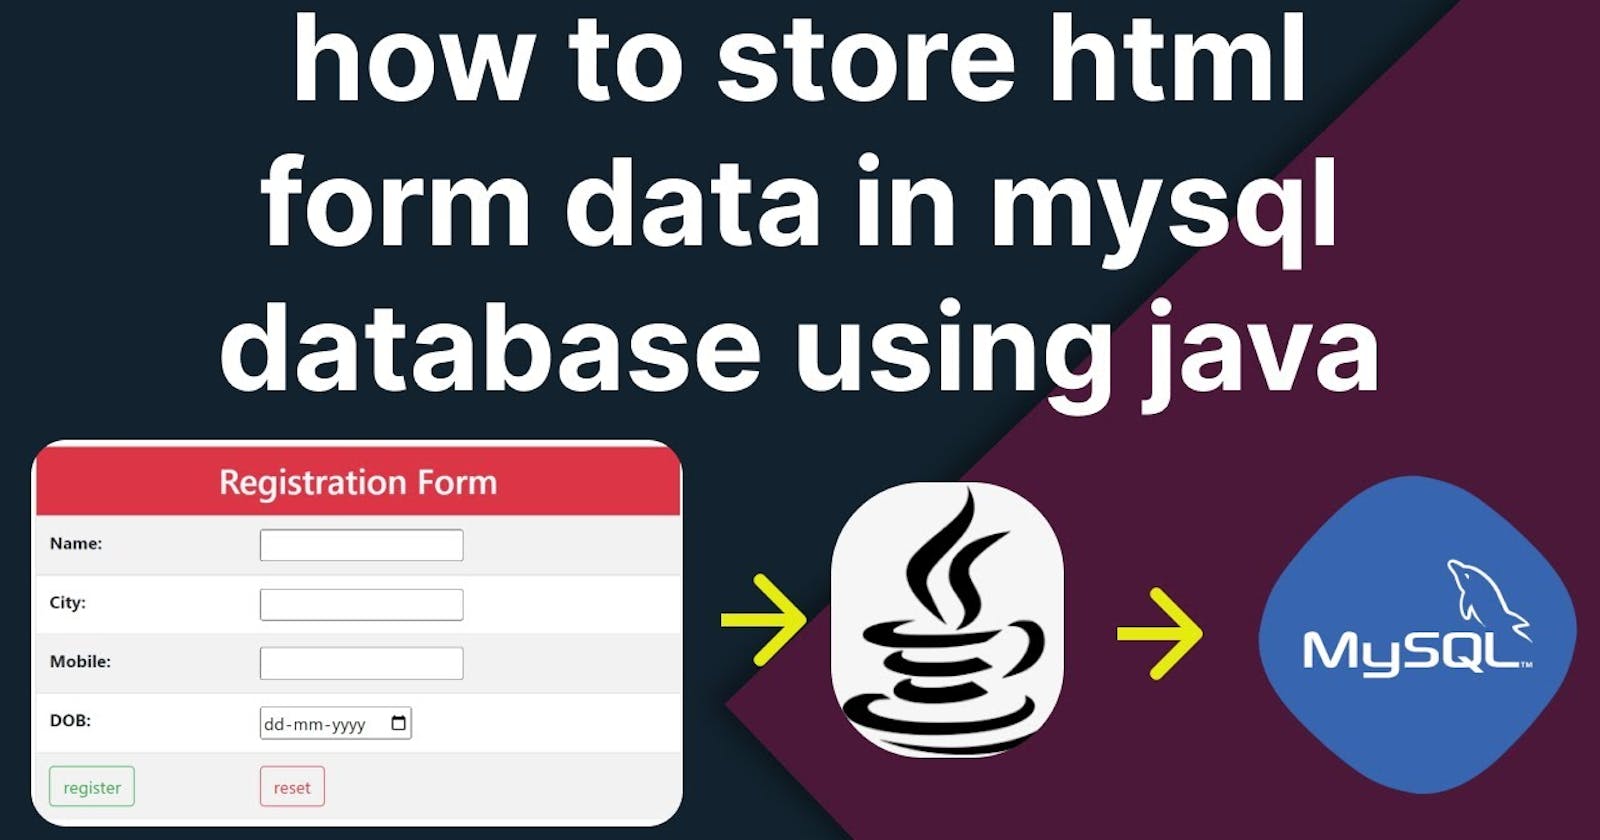 how to store html form data in mysql database using java | Java Servlet and JDBC Example